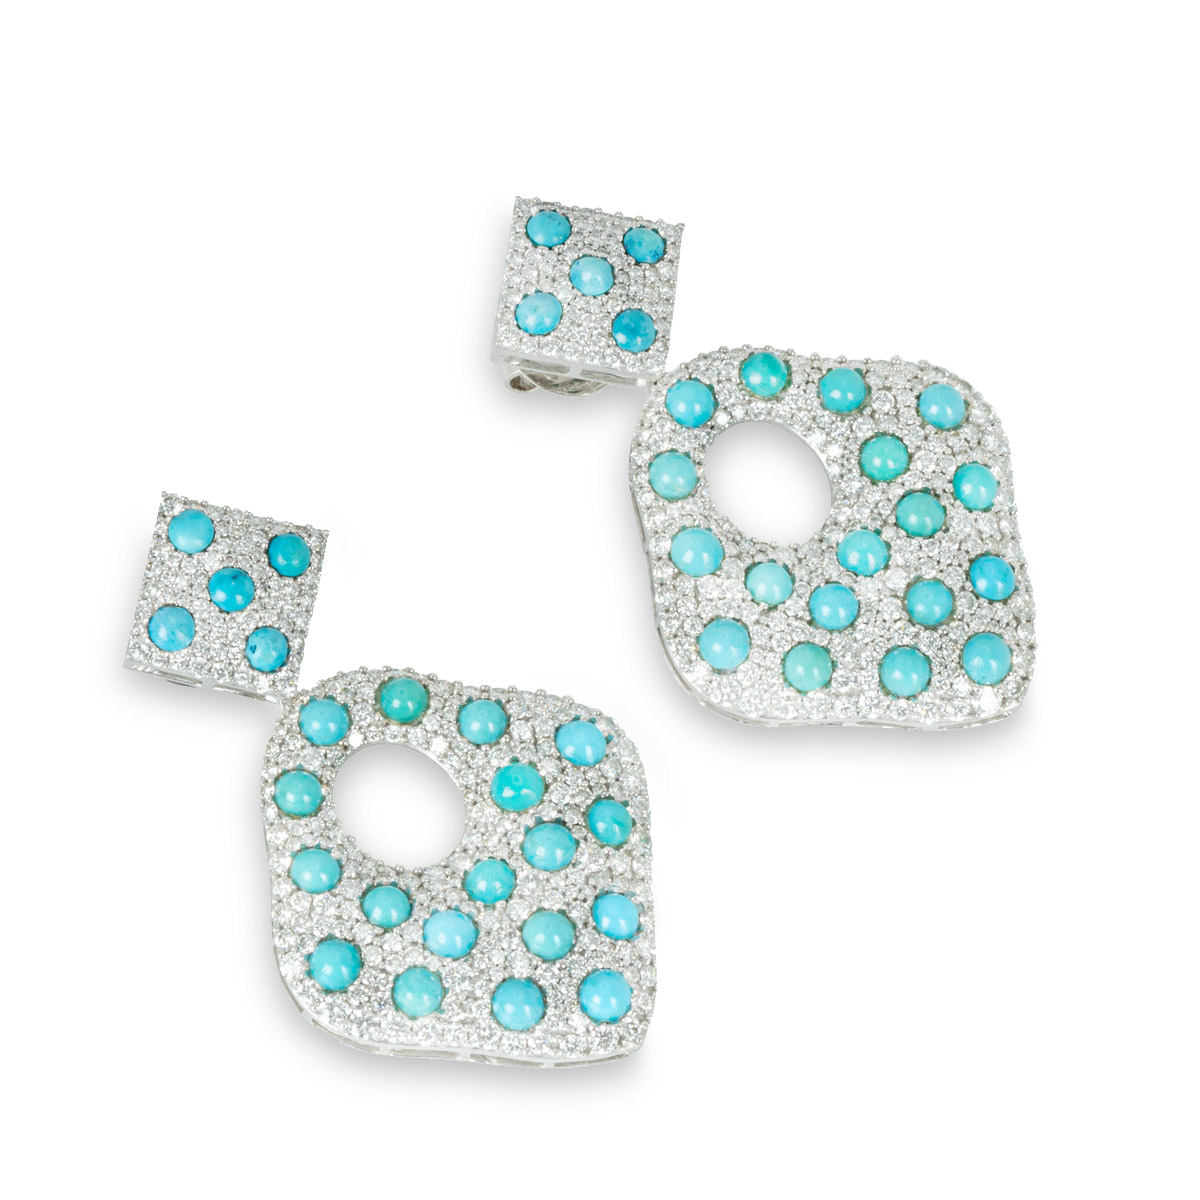 White Gold Diamond and Turquoise Drop Earrings